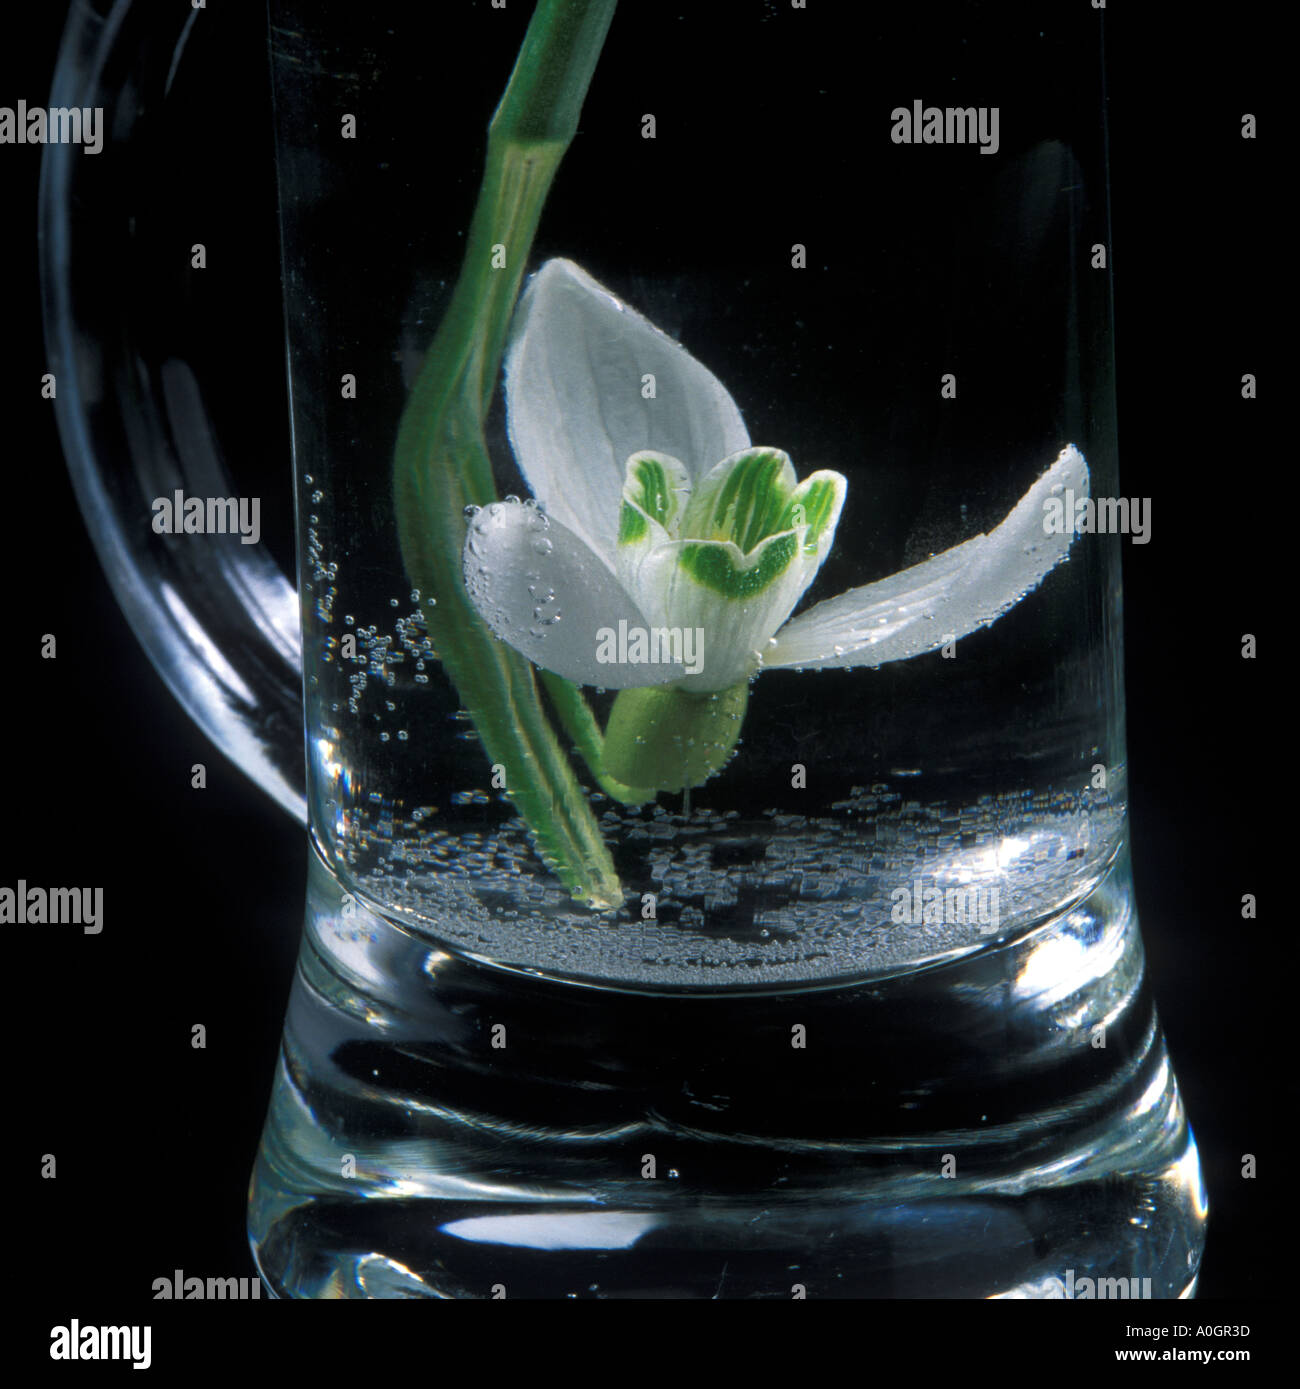 A Snowdrop flower submerged in a vase of water Stock Photo